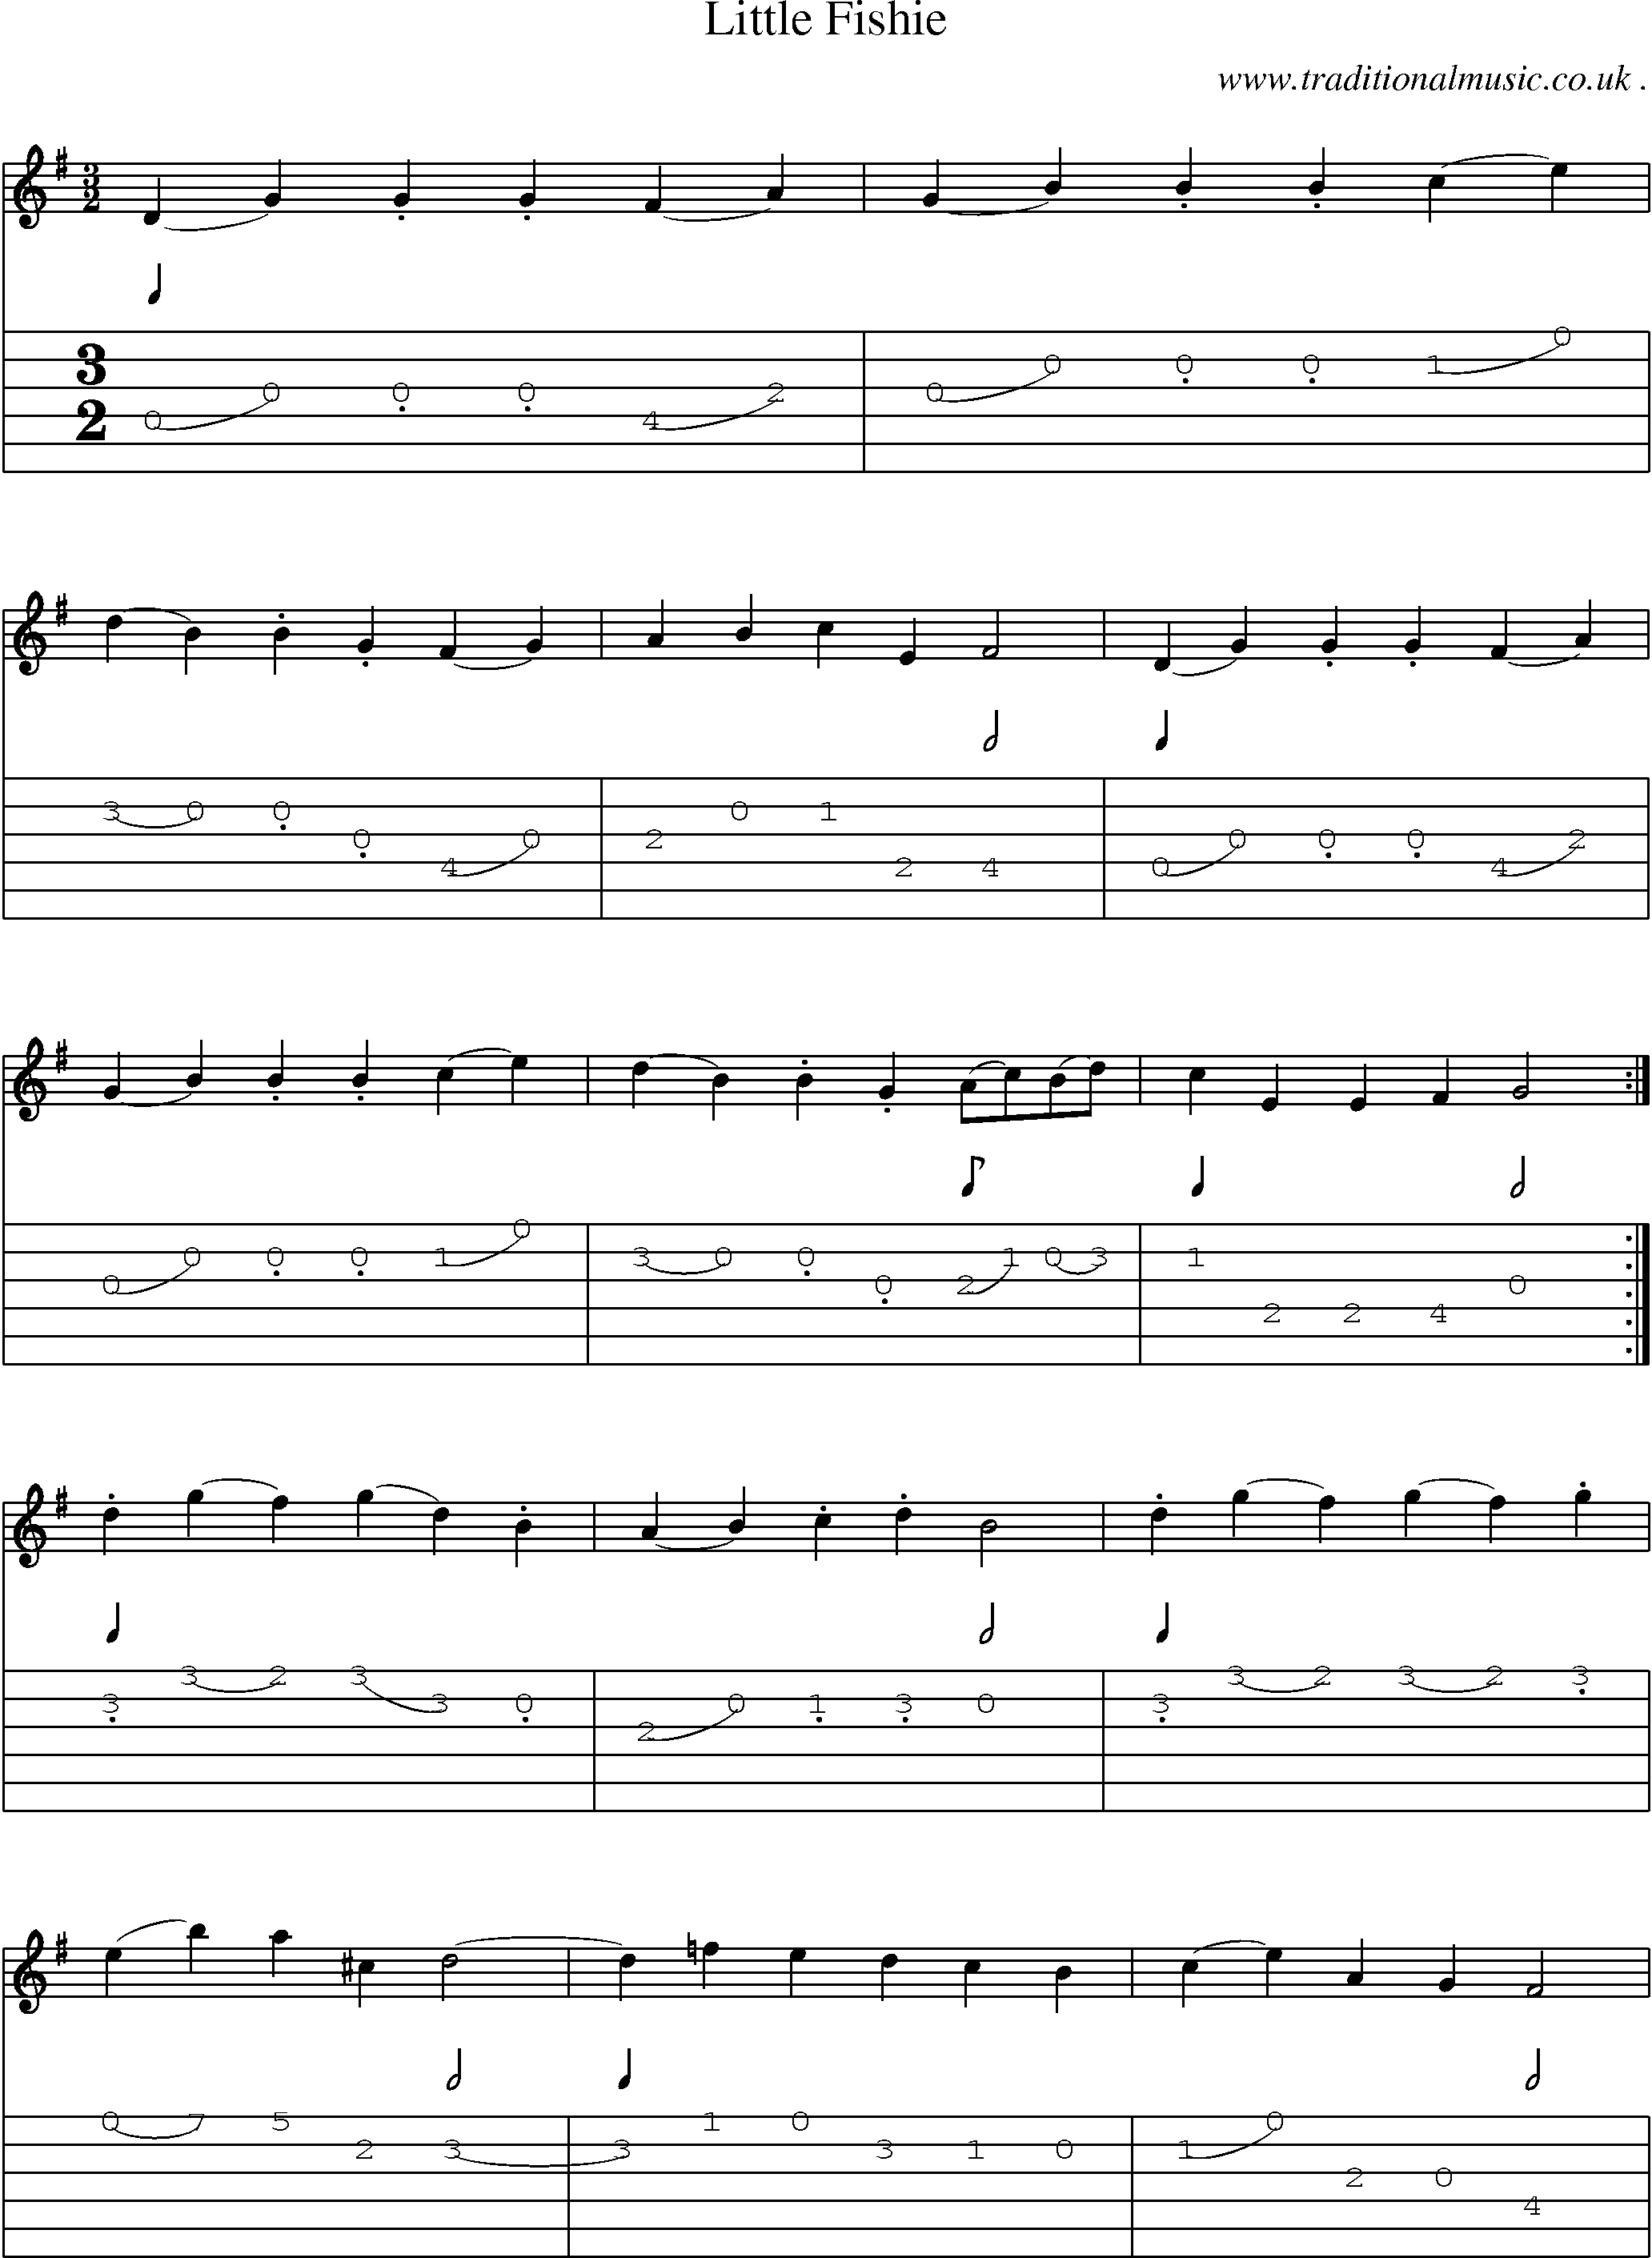 Sheet-Music and Guitar Tabs for Little Fishie